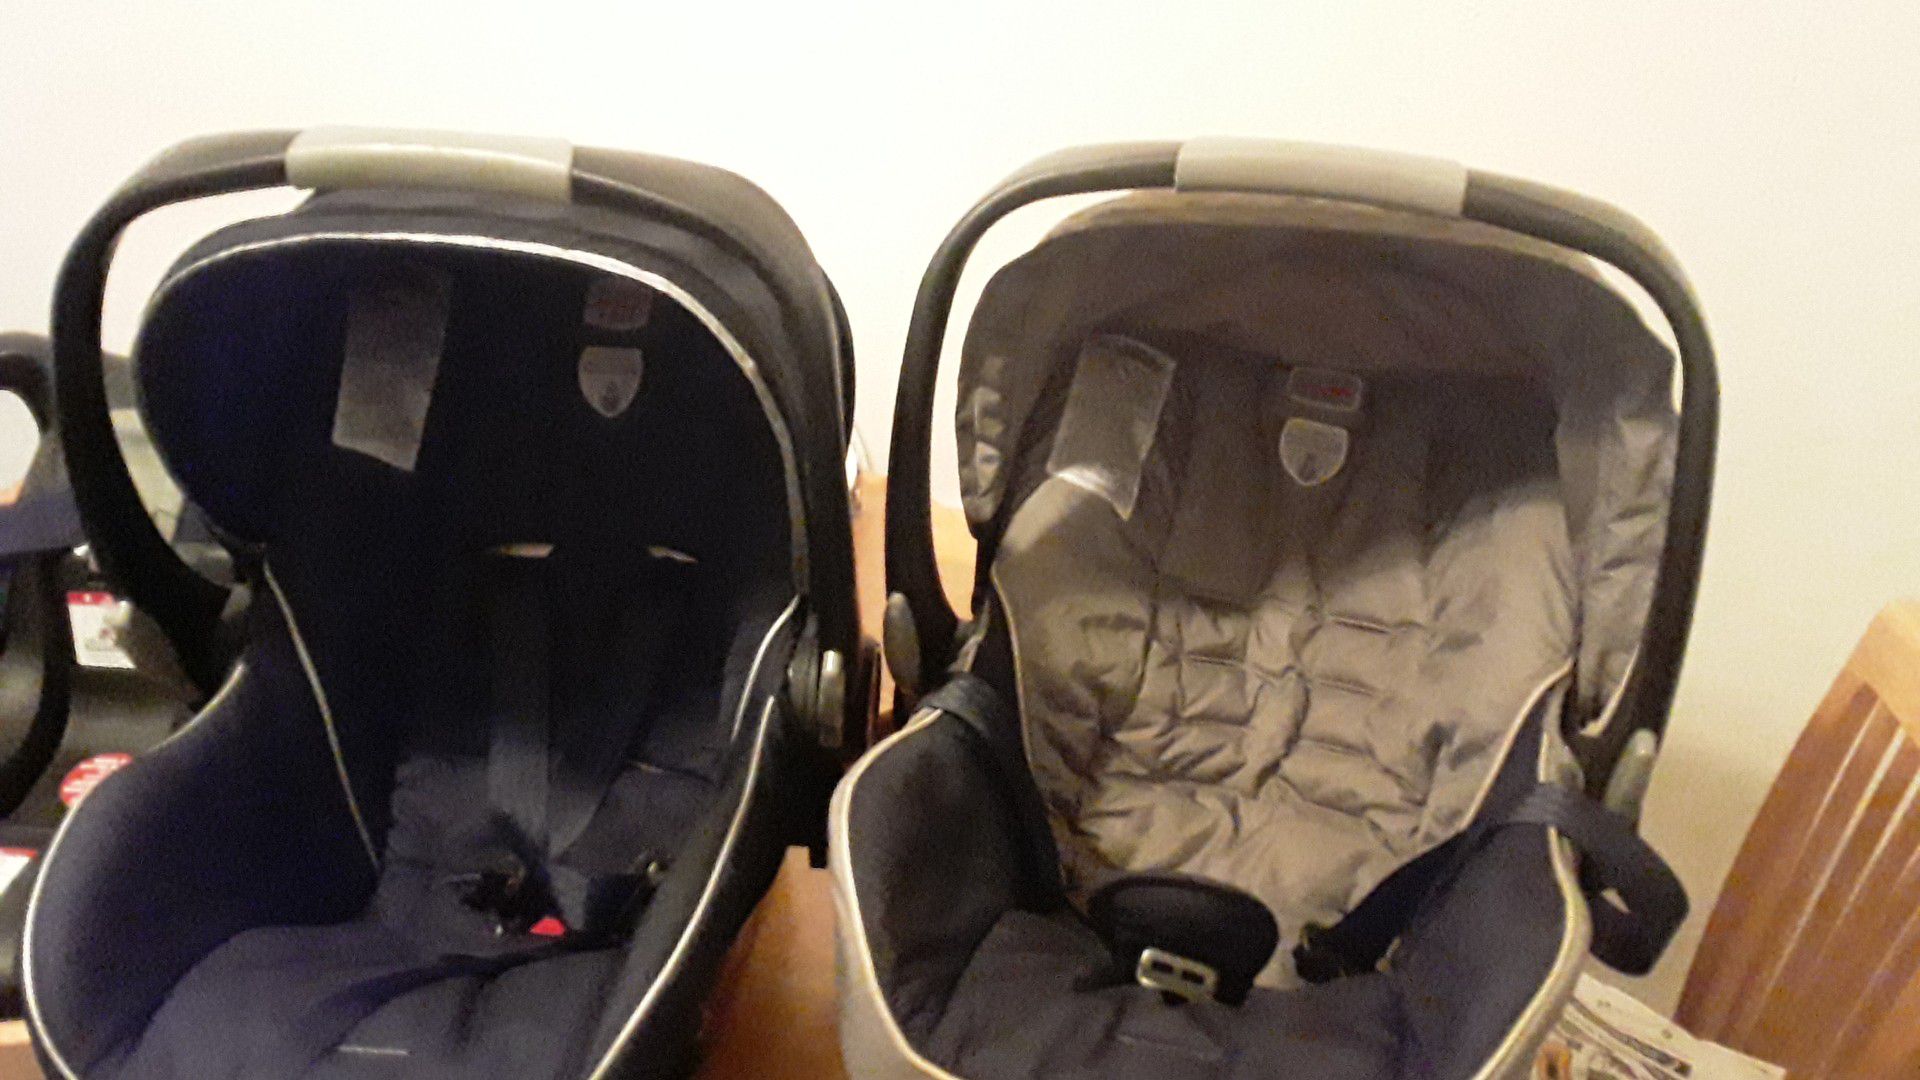 2 infant car Seat britax with base good condition